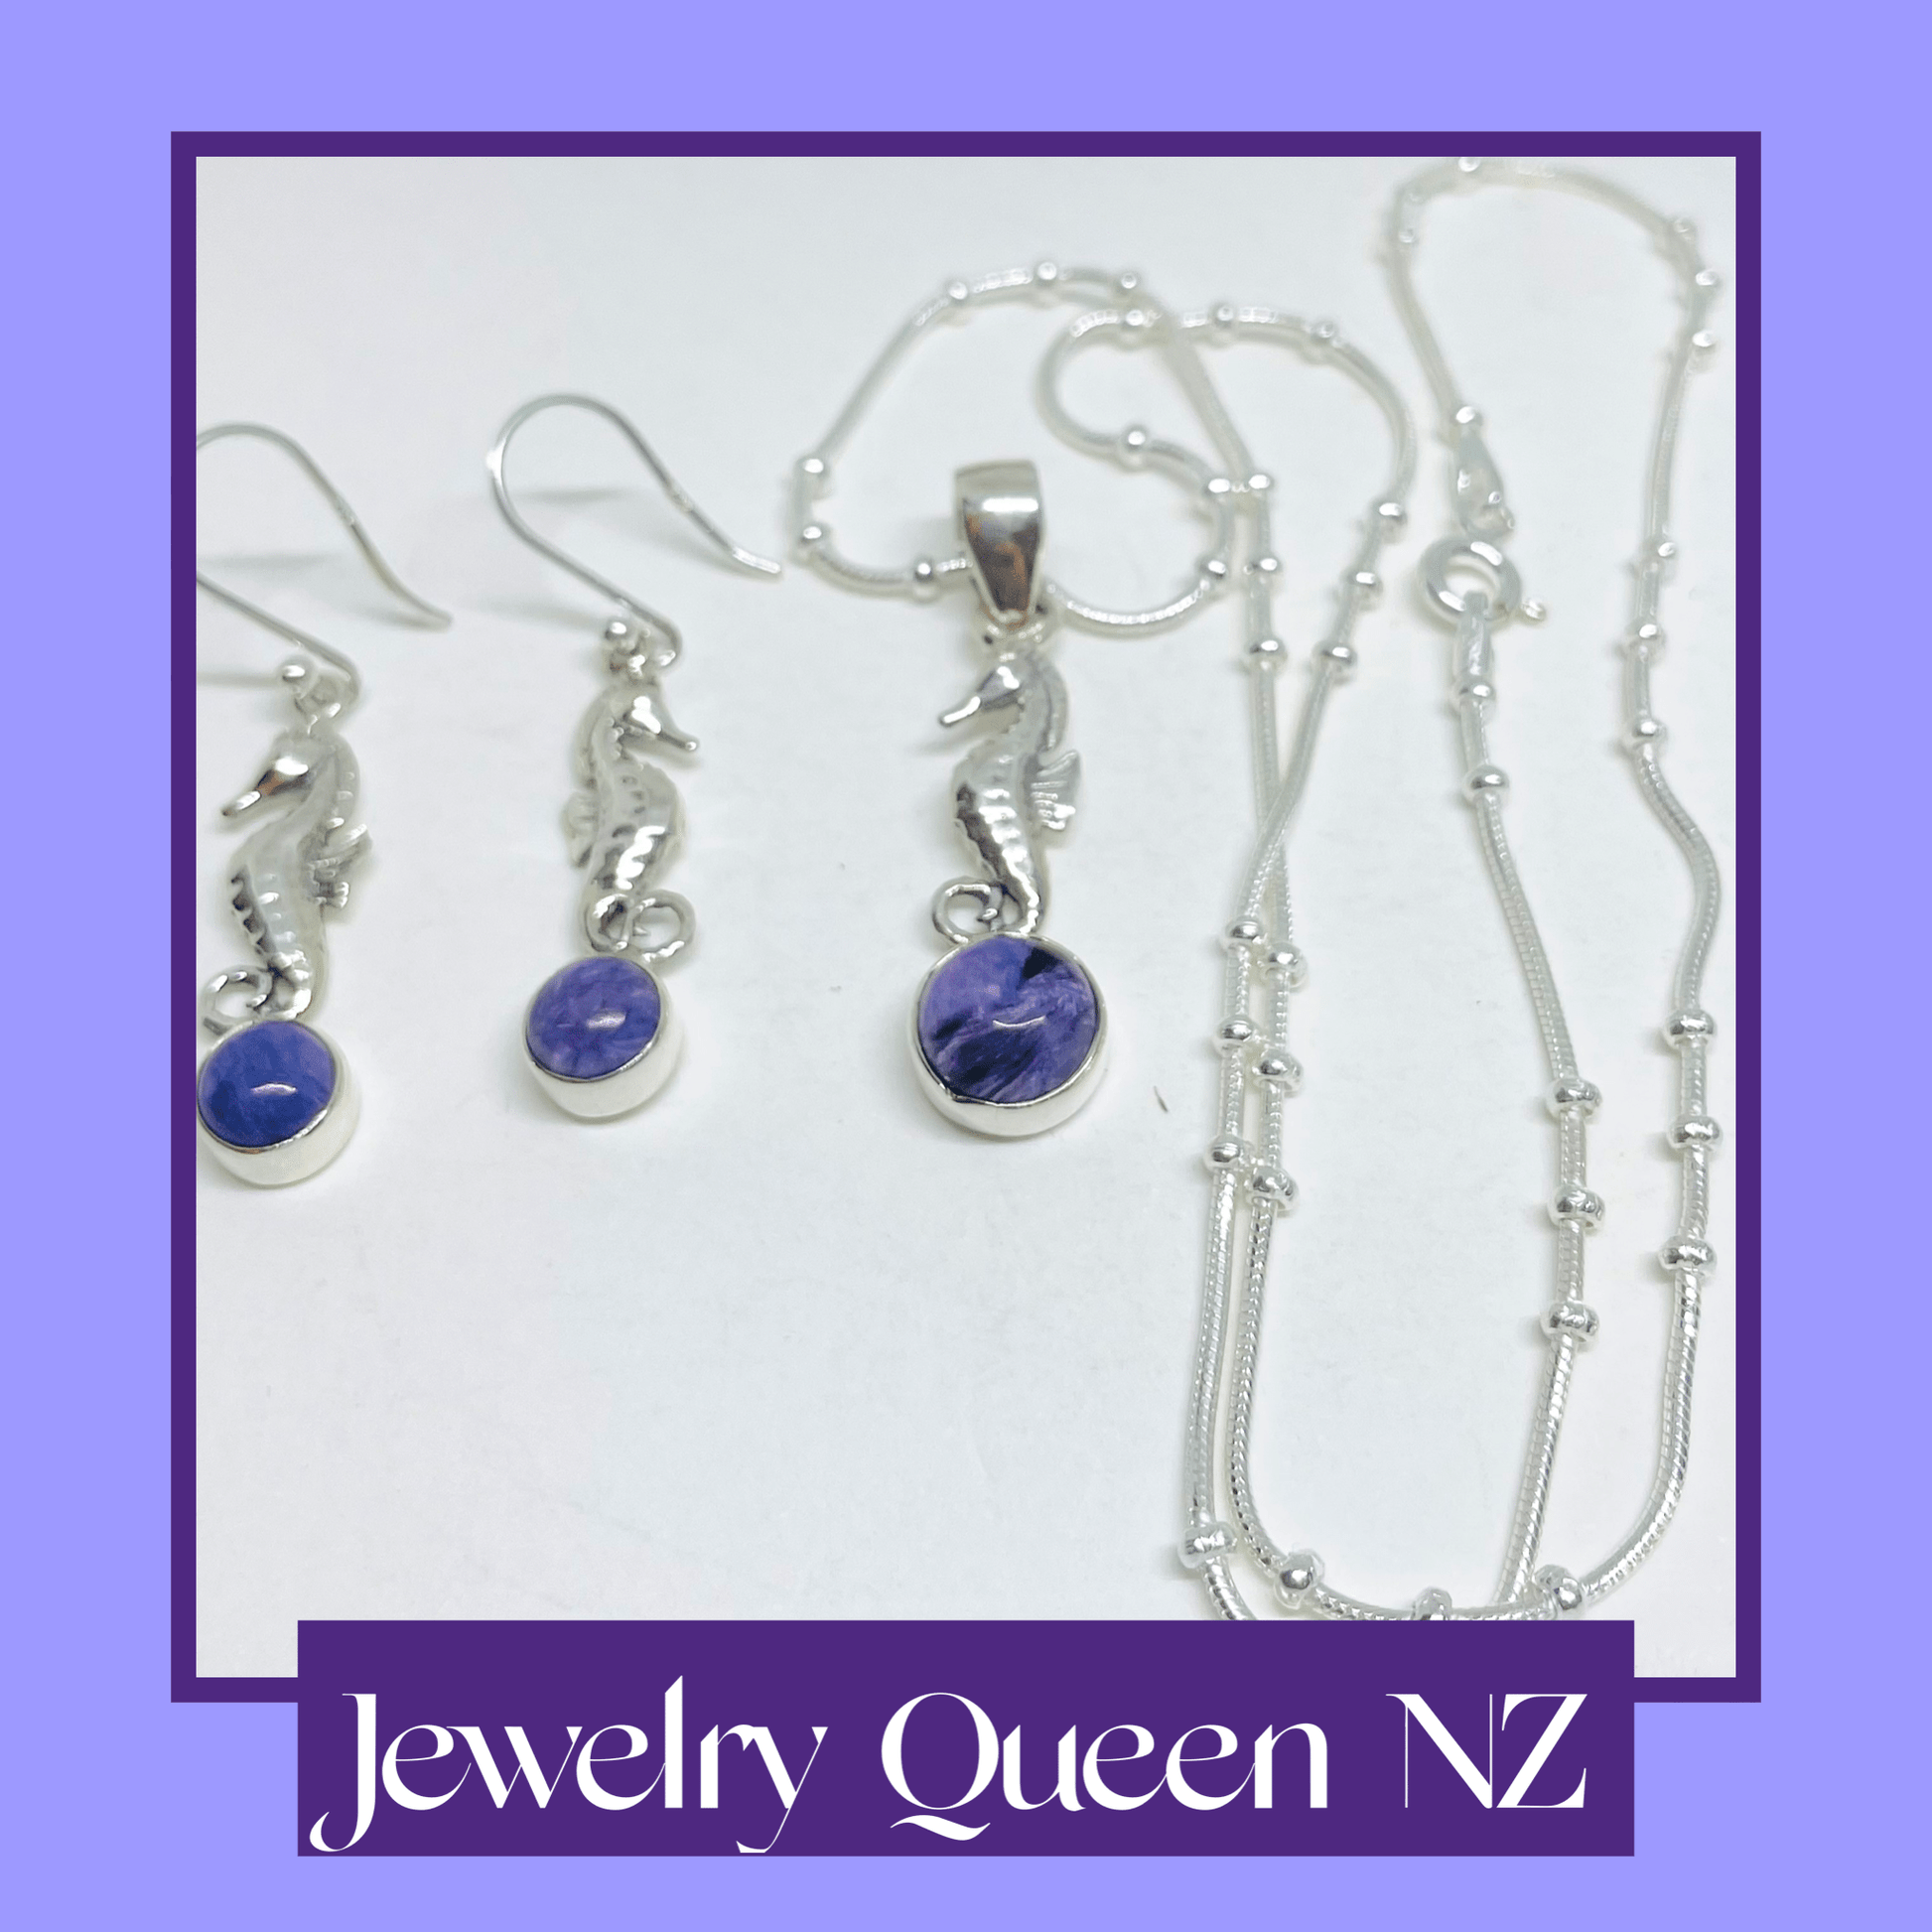 Sterling silver Seahorse and Siberian charoite necklace and earrings set